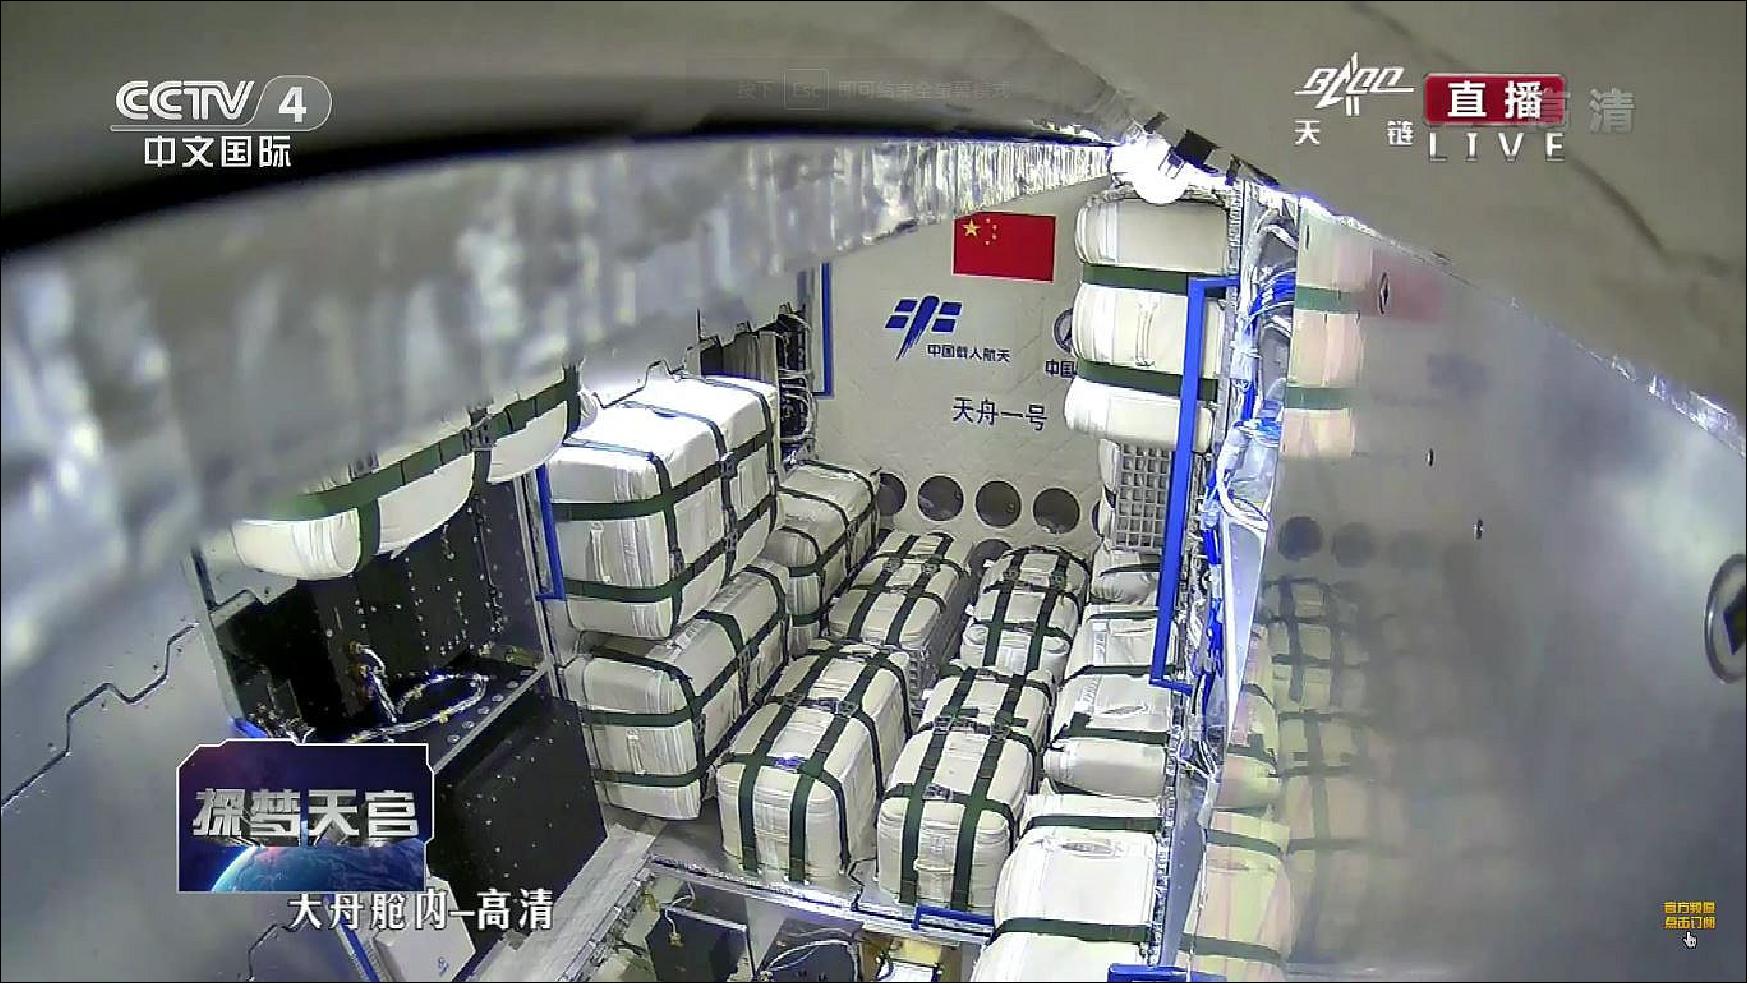 Figure 47: A view inside the cargo section of the Tianzhou-1 cargo spacecraft (image credit: CCTV/framegrab)